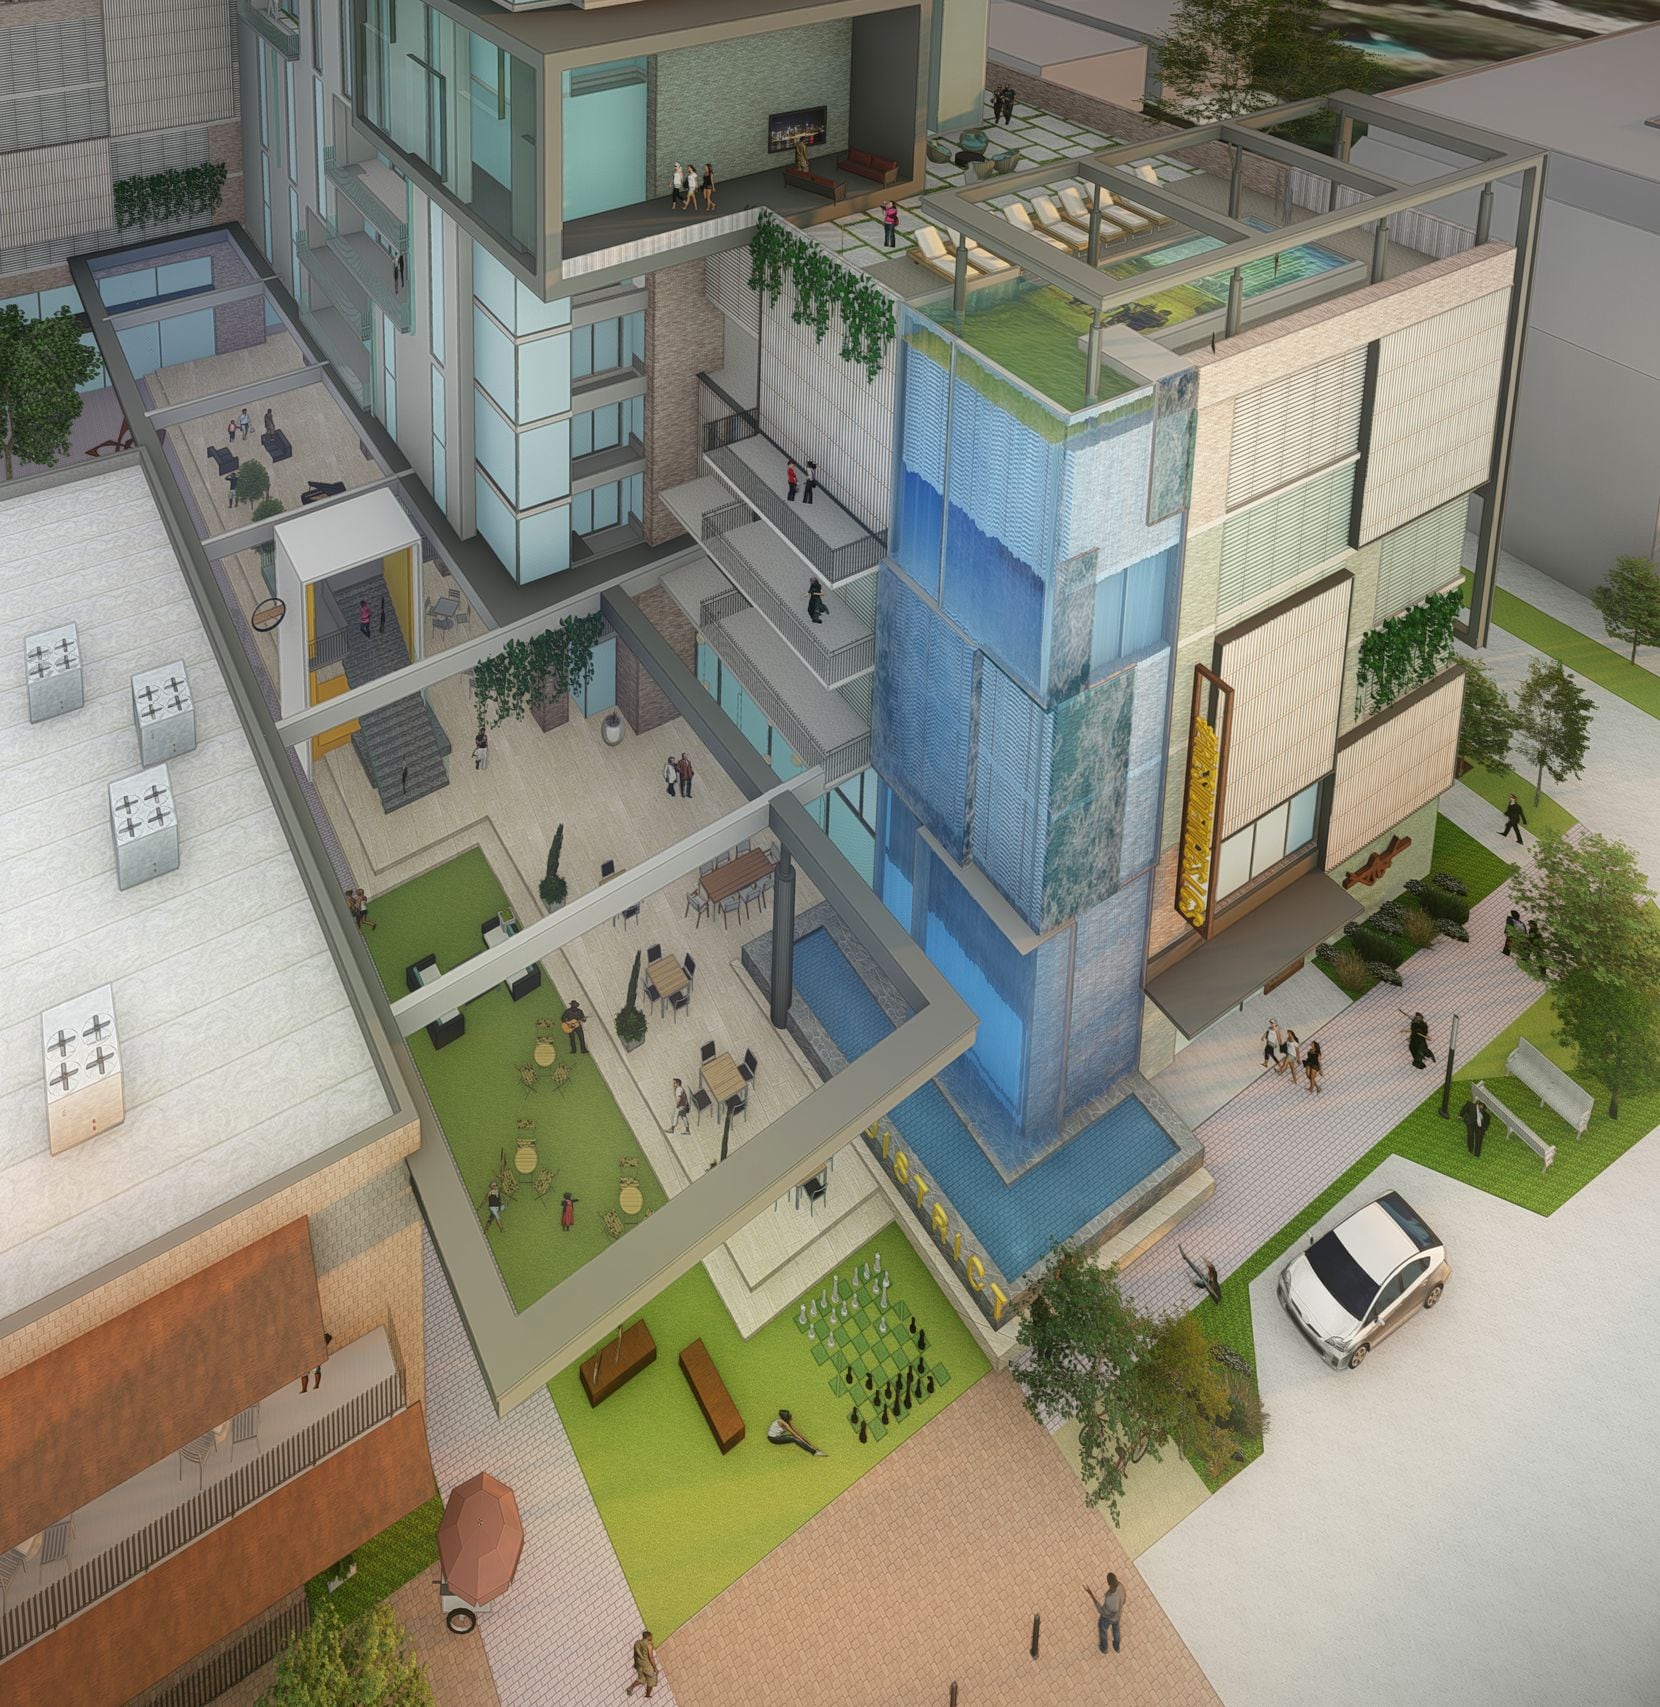 A public plaza with retail space and a water feature would face Throckmorton Street.